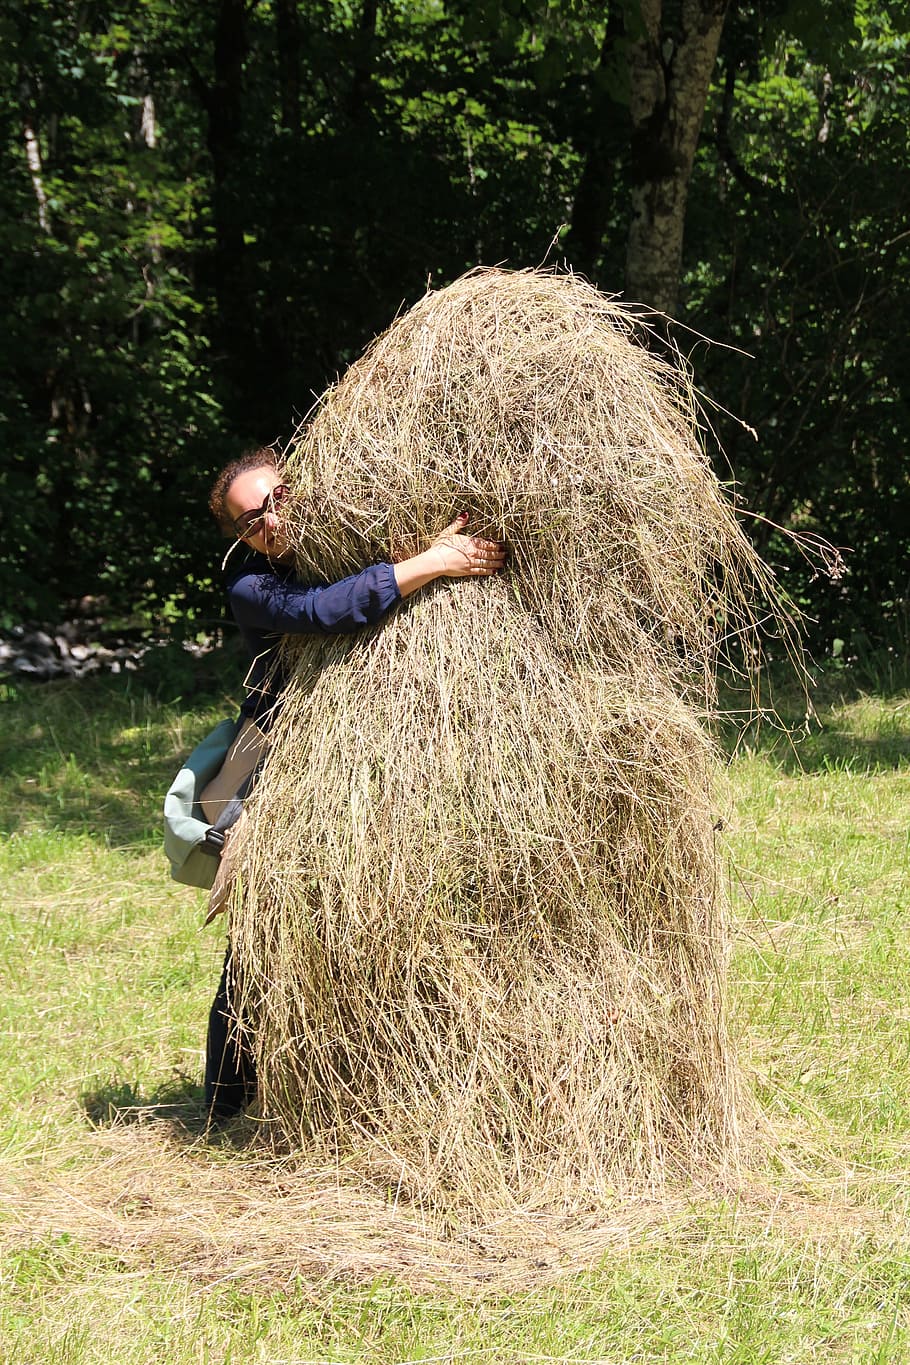 haystack, hide, hay, pile, harvest, plant, land, real people, one person, field